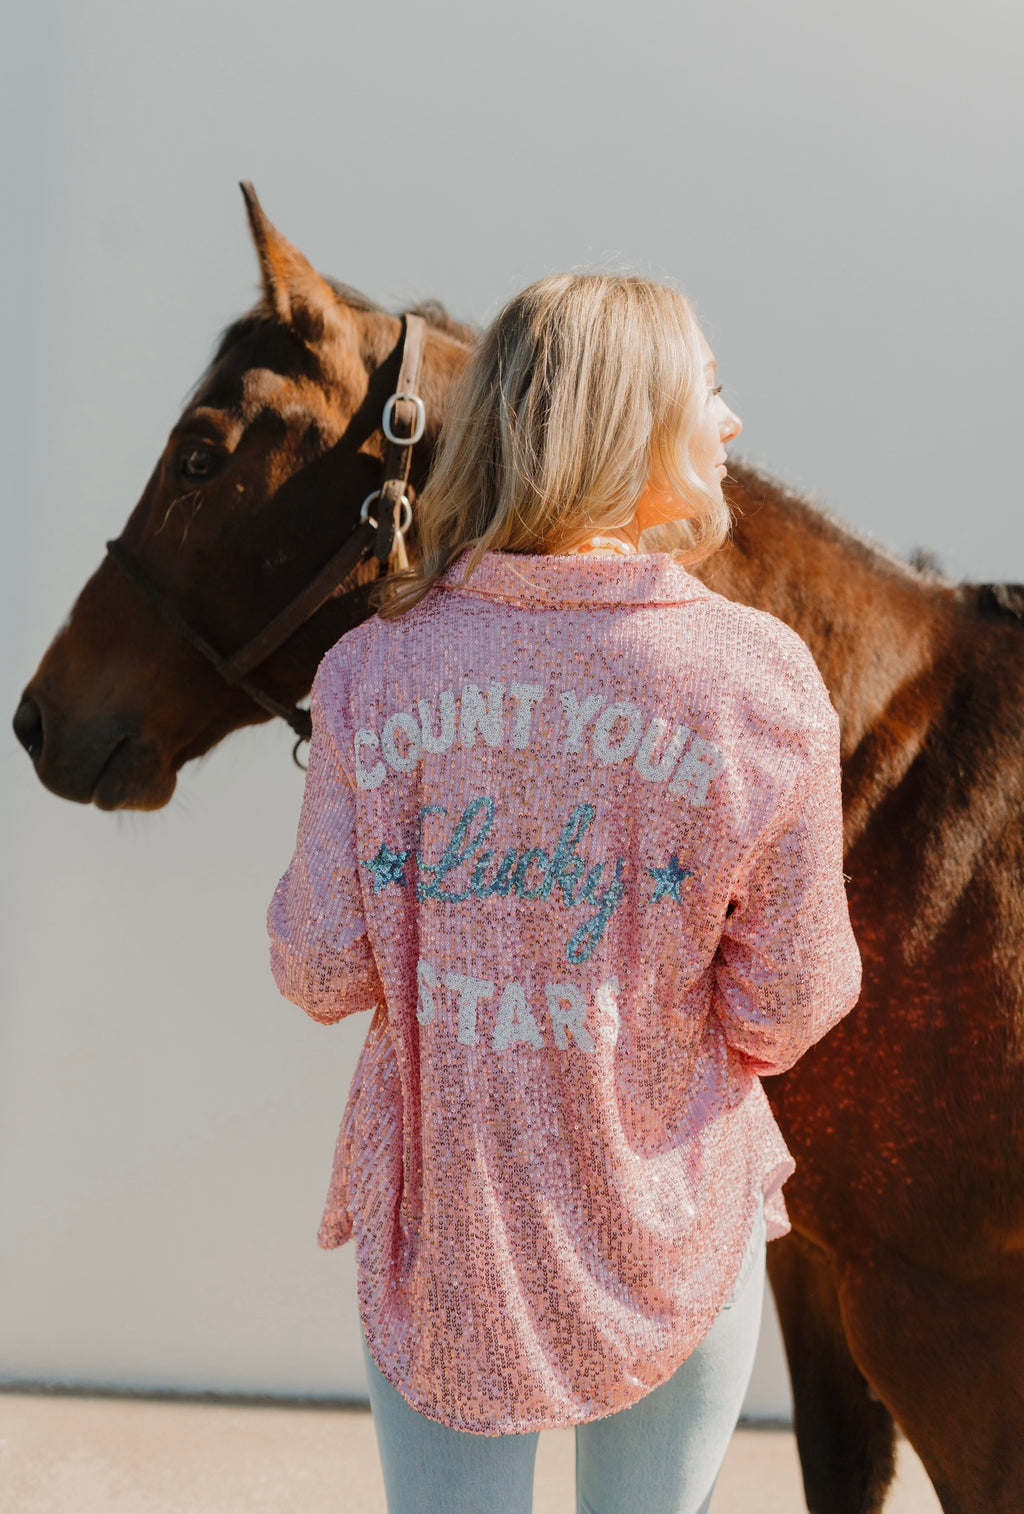 Count YOur lucky stars pink sequin top tunic